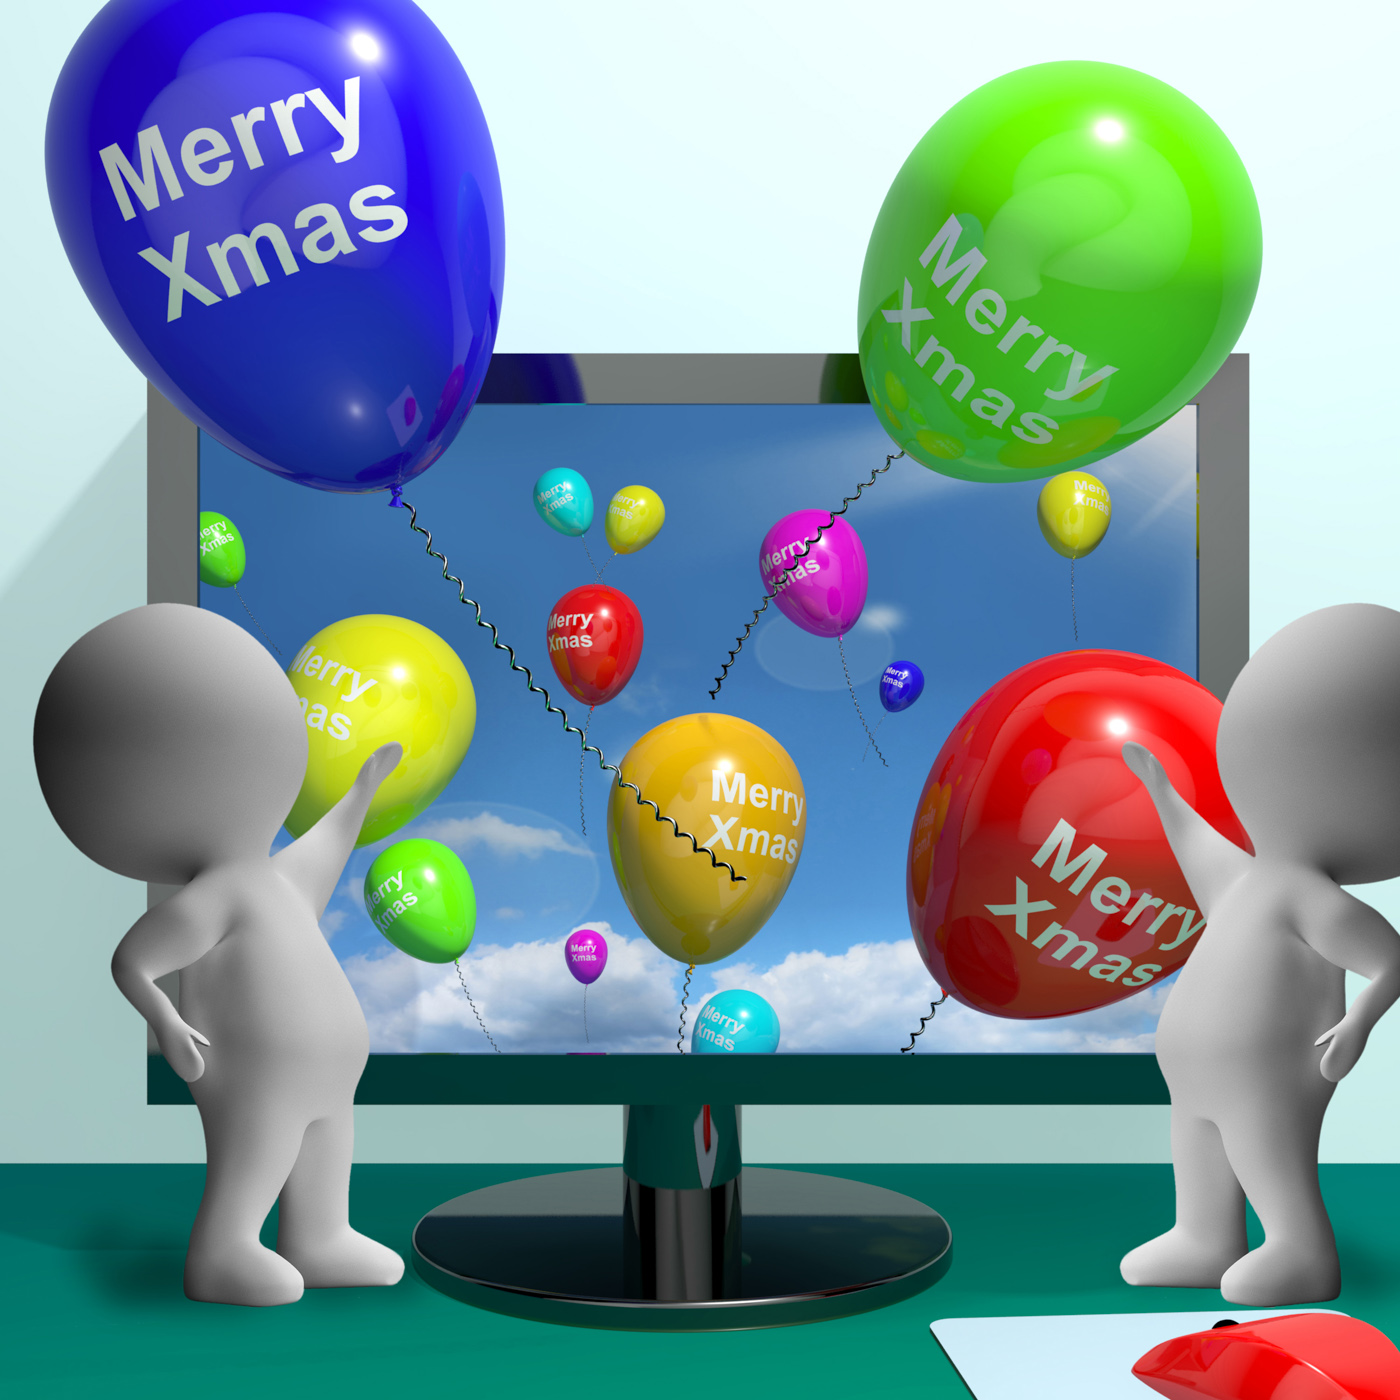 Balloons With Happy Xmas Showing Online Greeting, Balloons, Holiday, Www, Send, HQ Photo